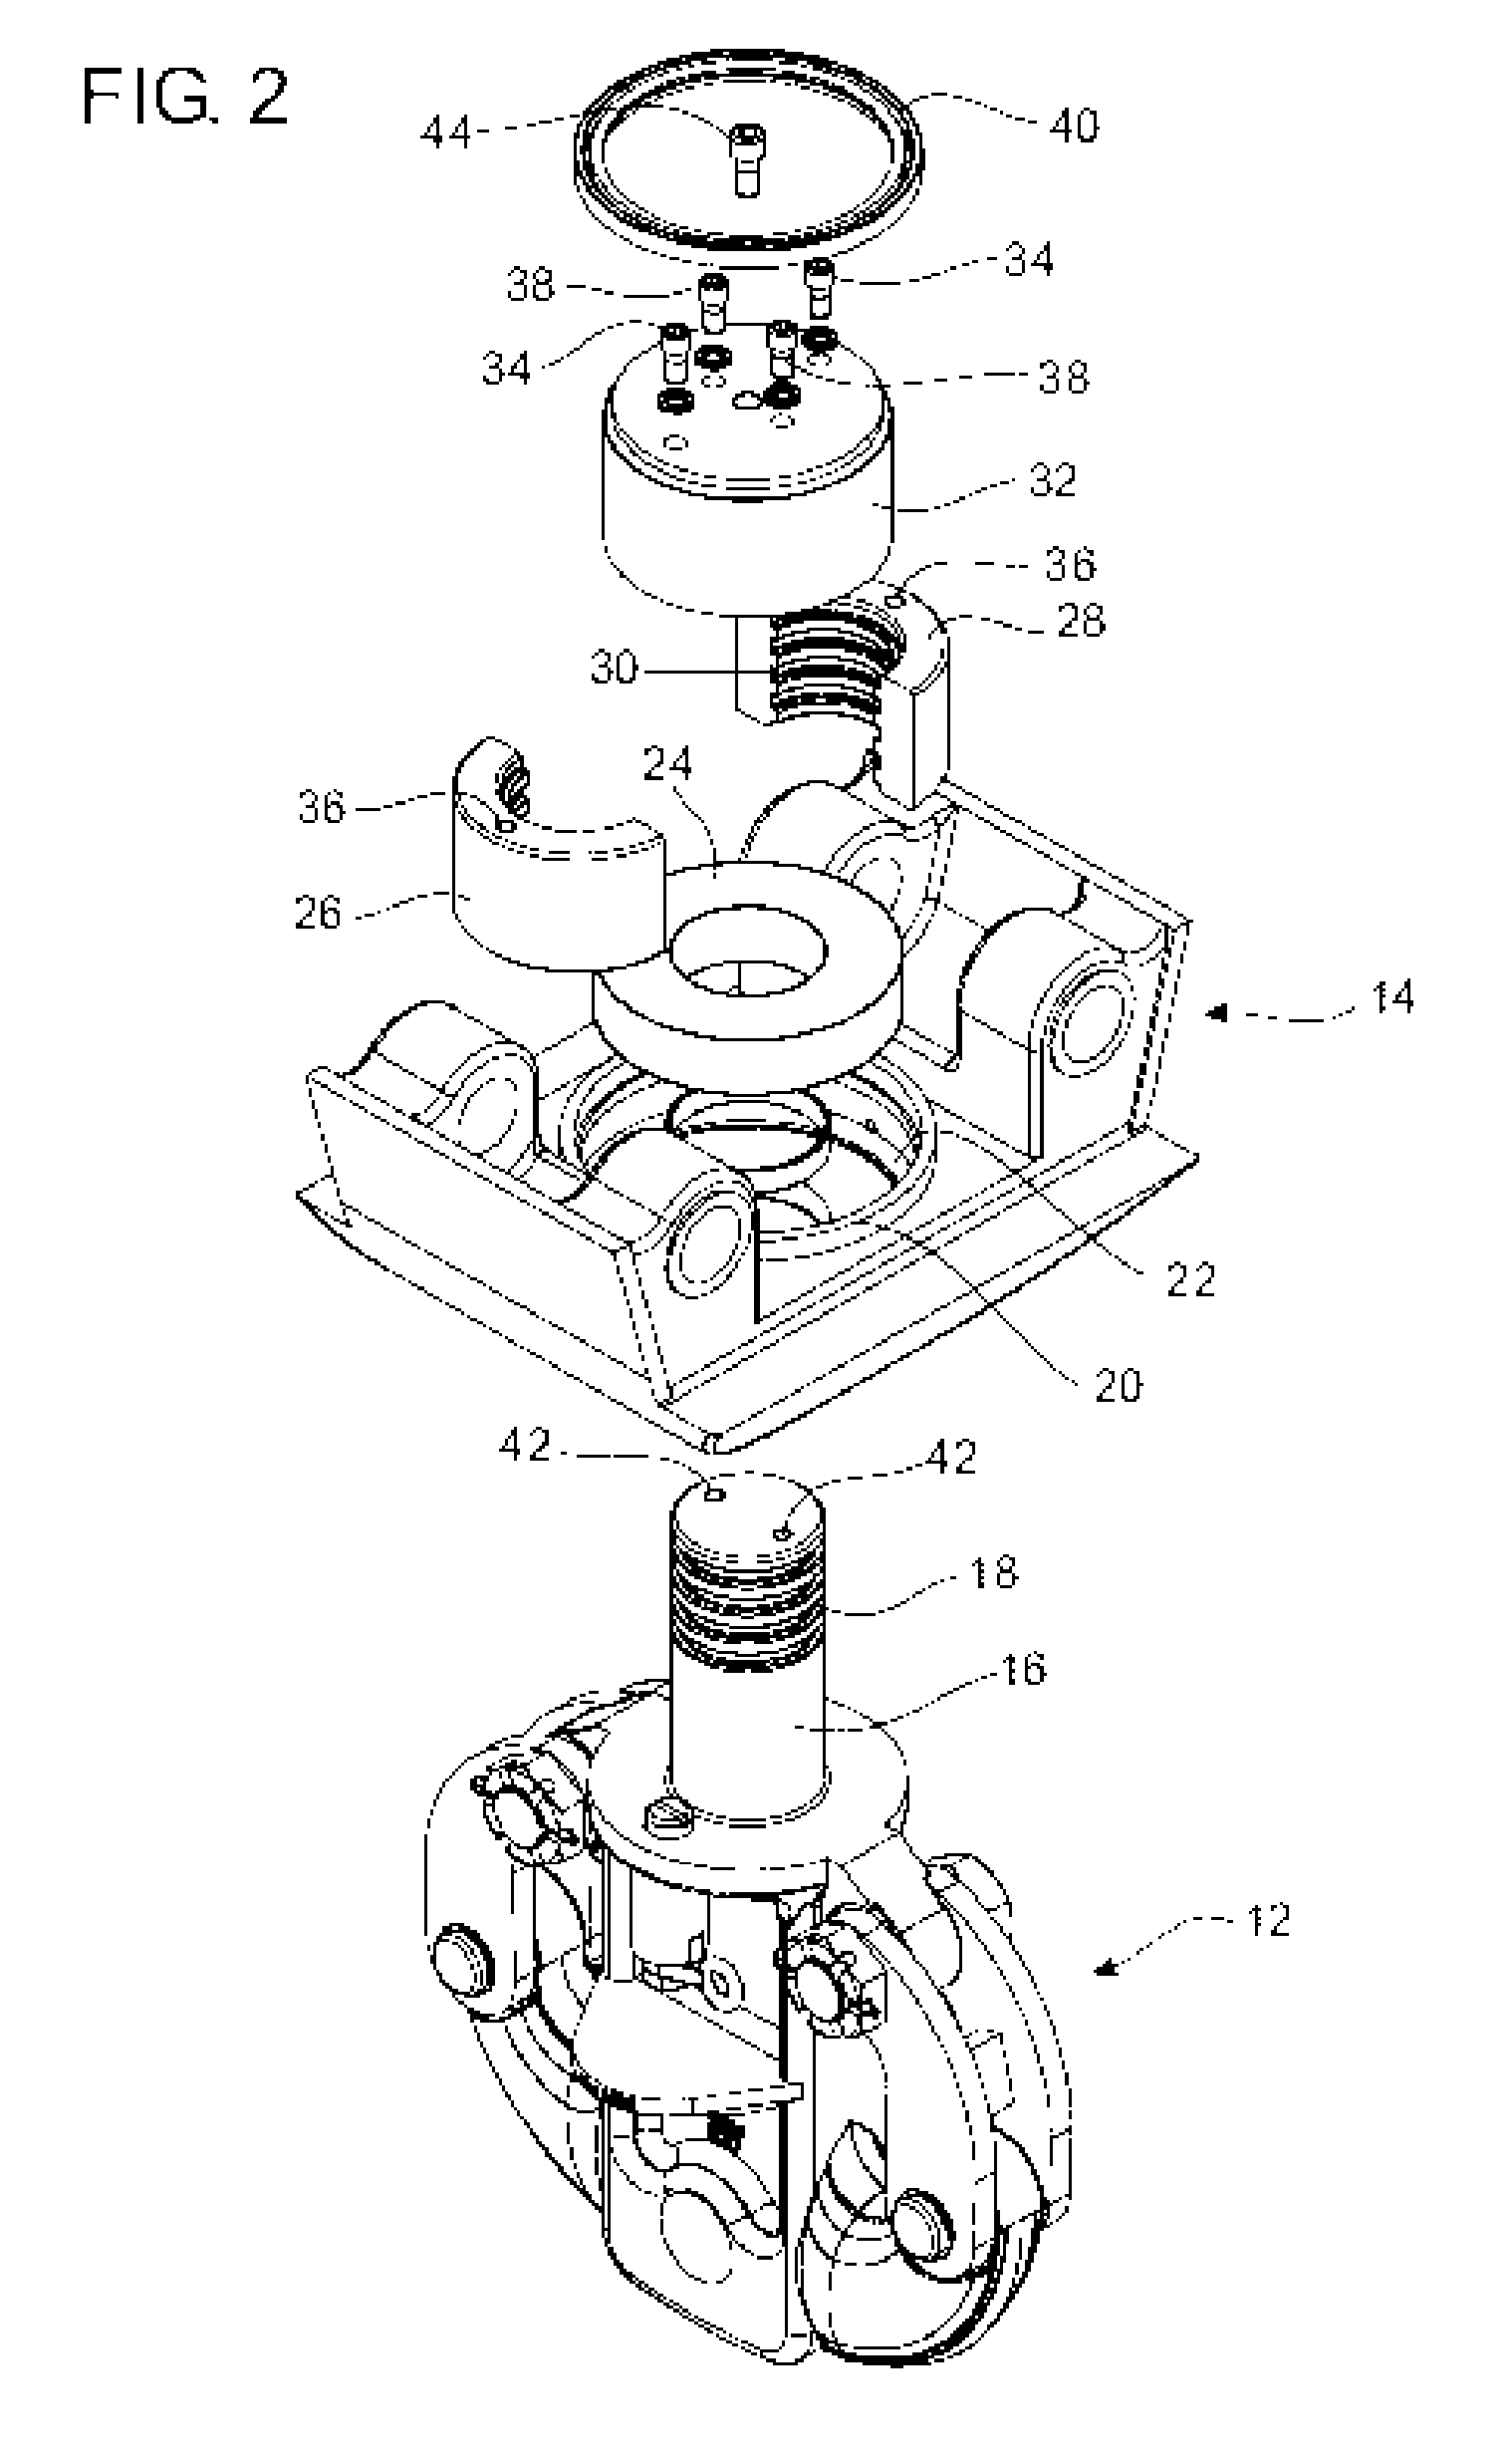 Retaining keeper assembly for a hoisting device